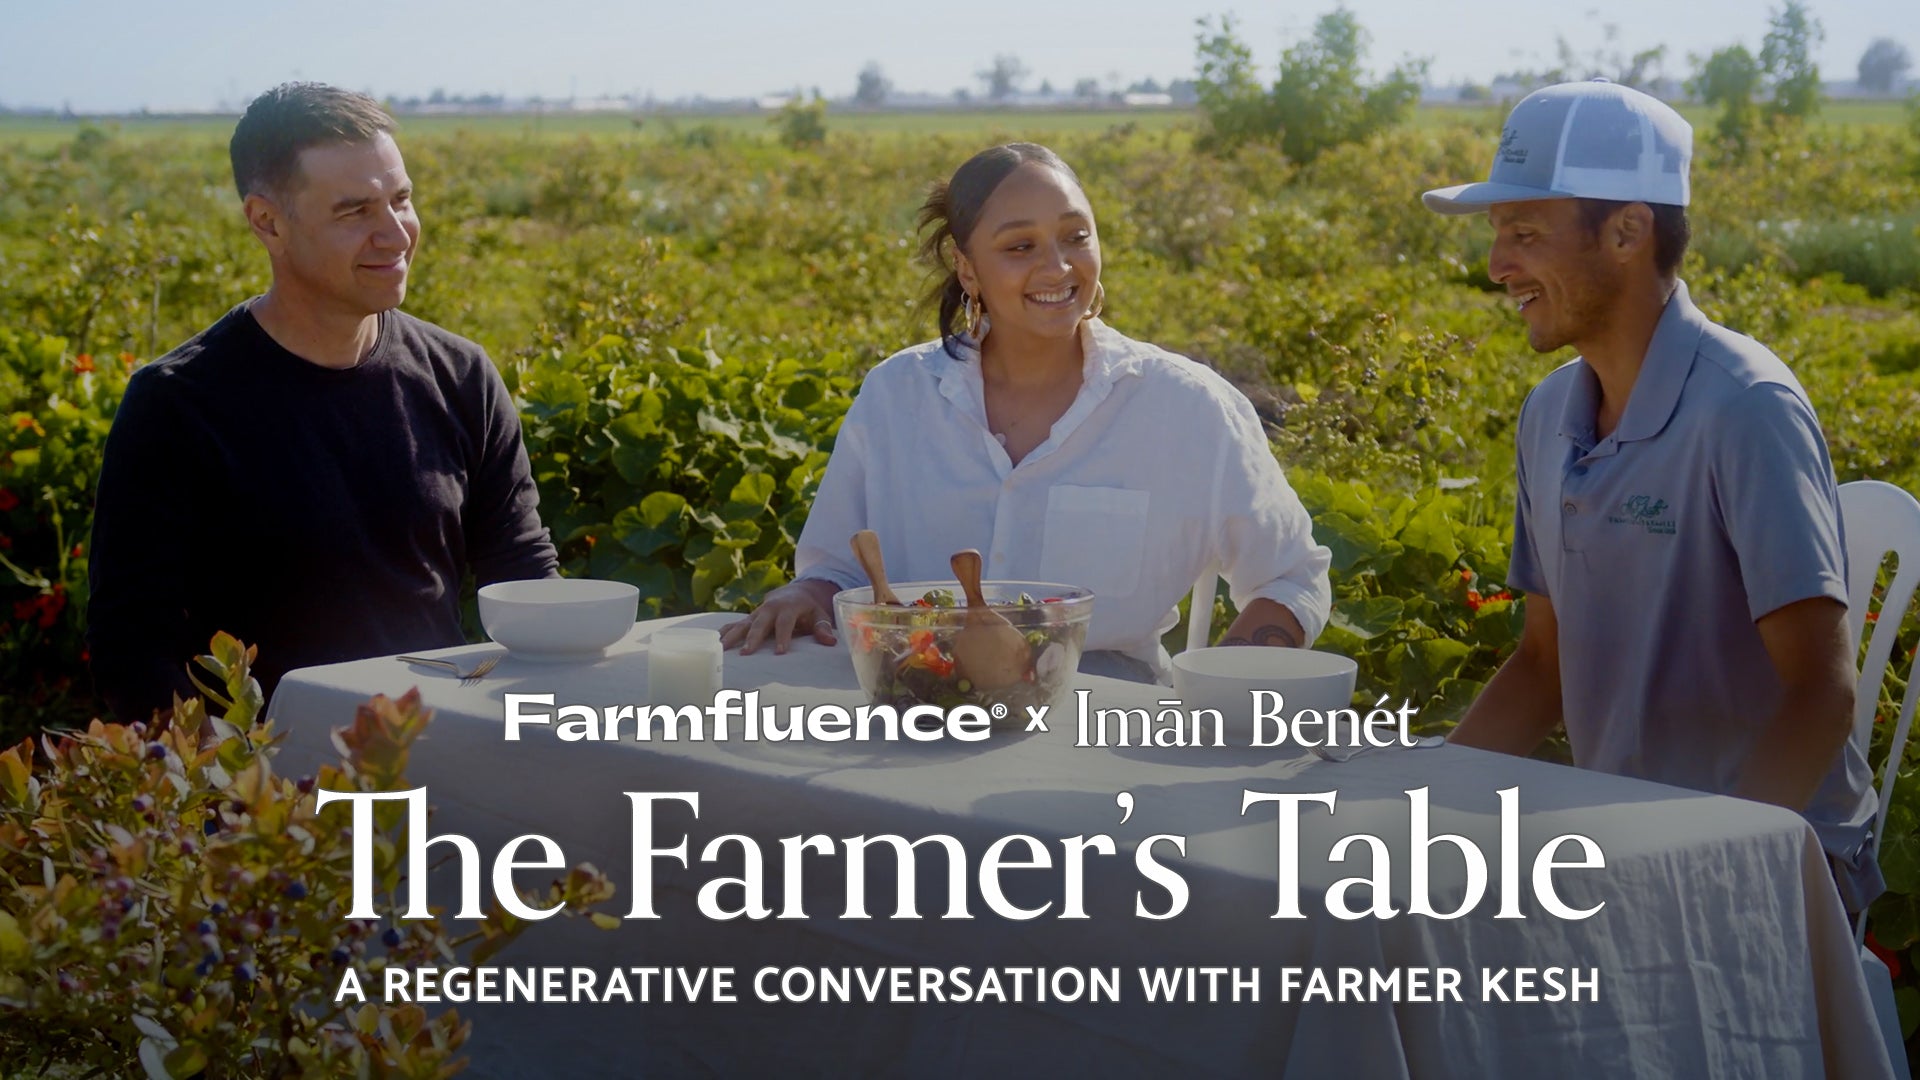 Why Regenerative Farming Is Important? The Farmer's Table